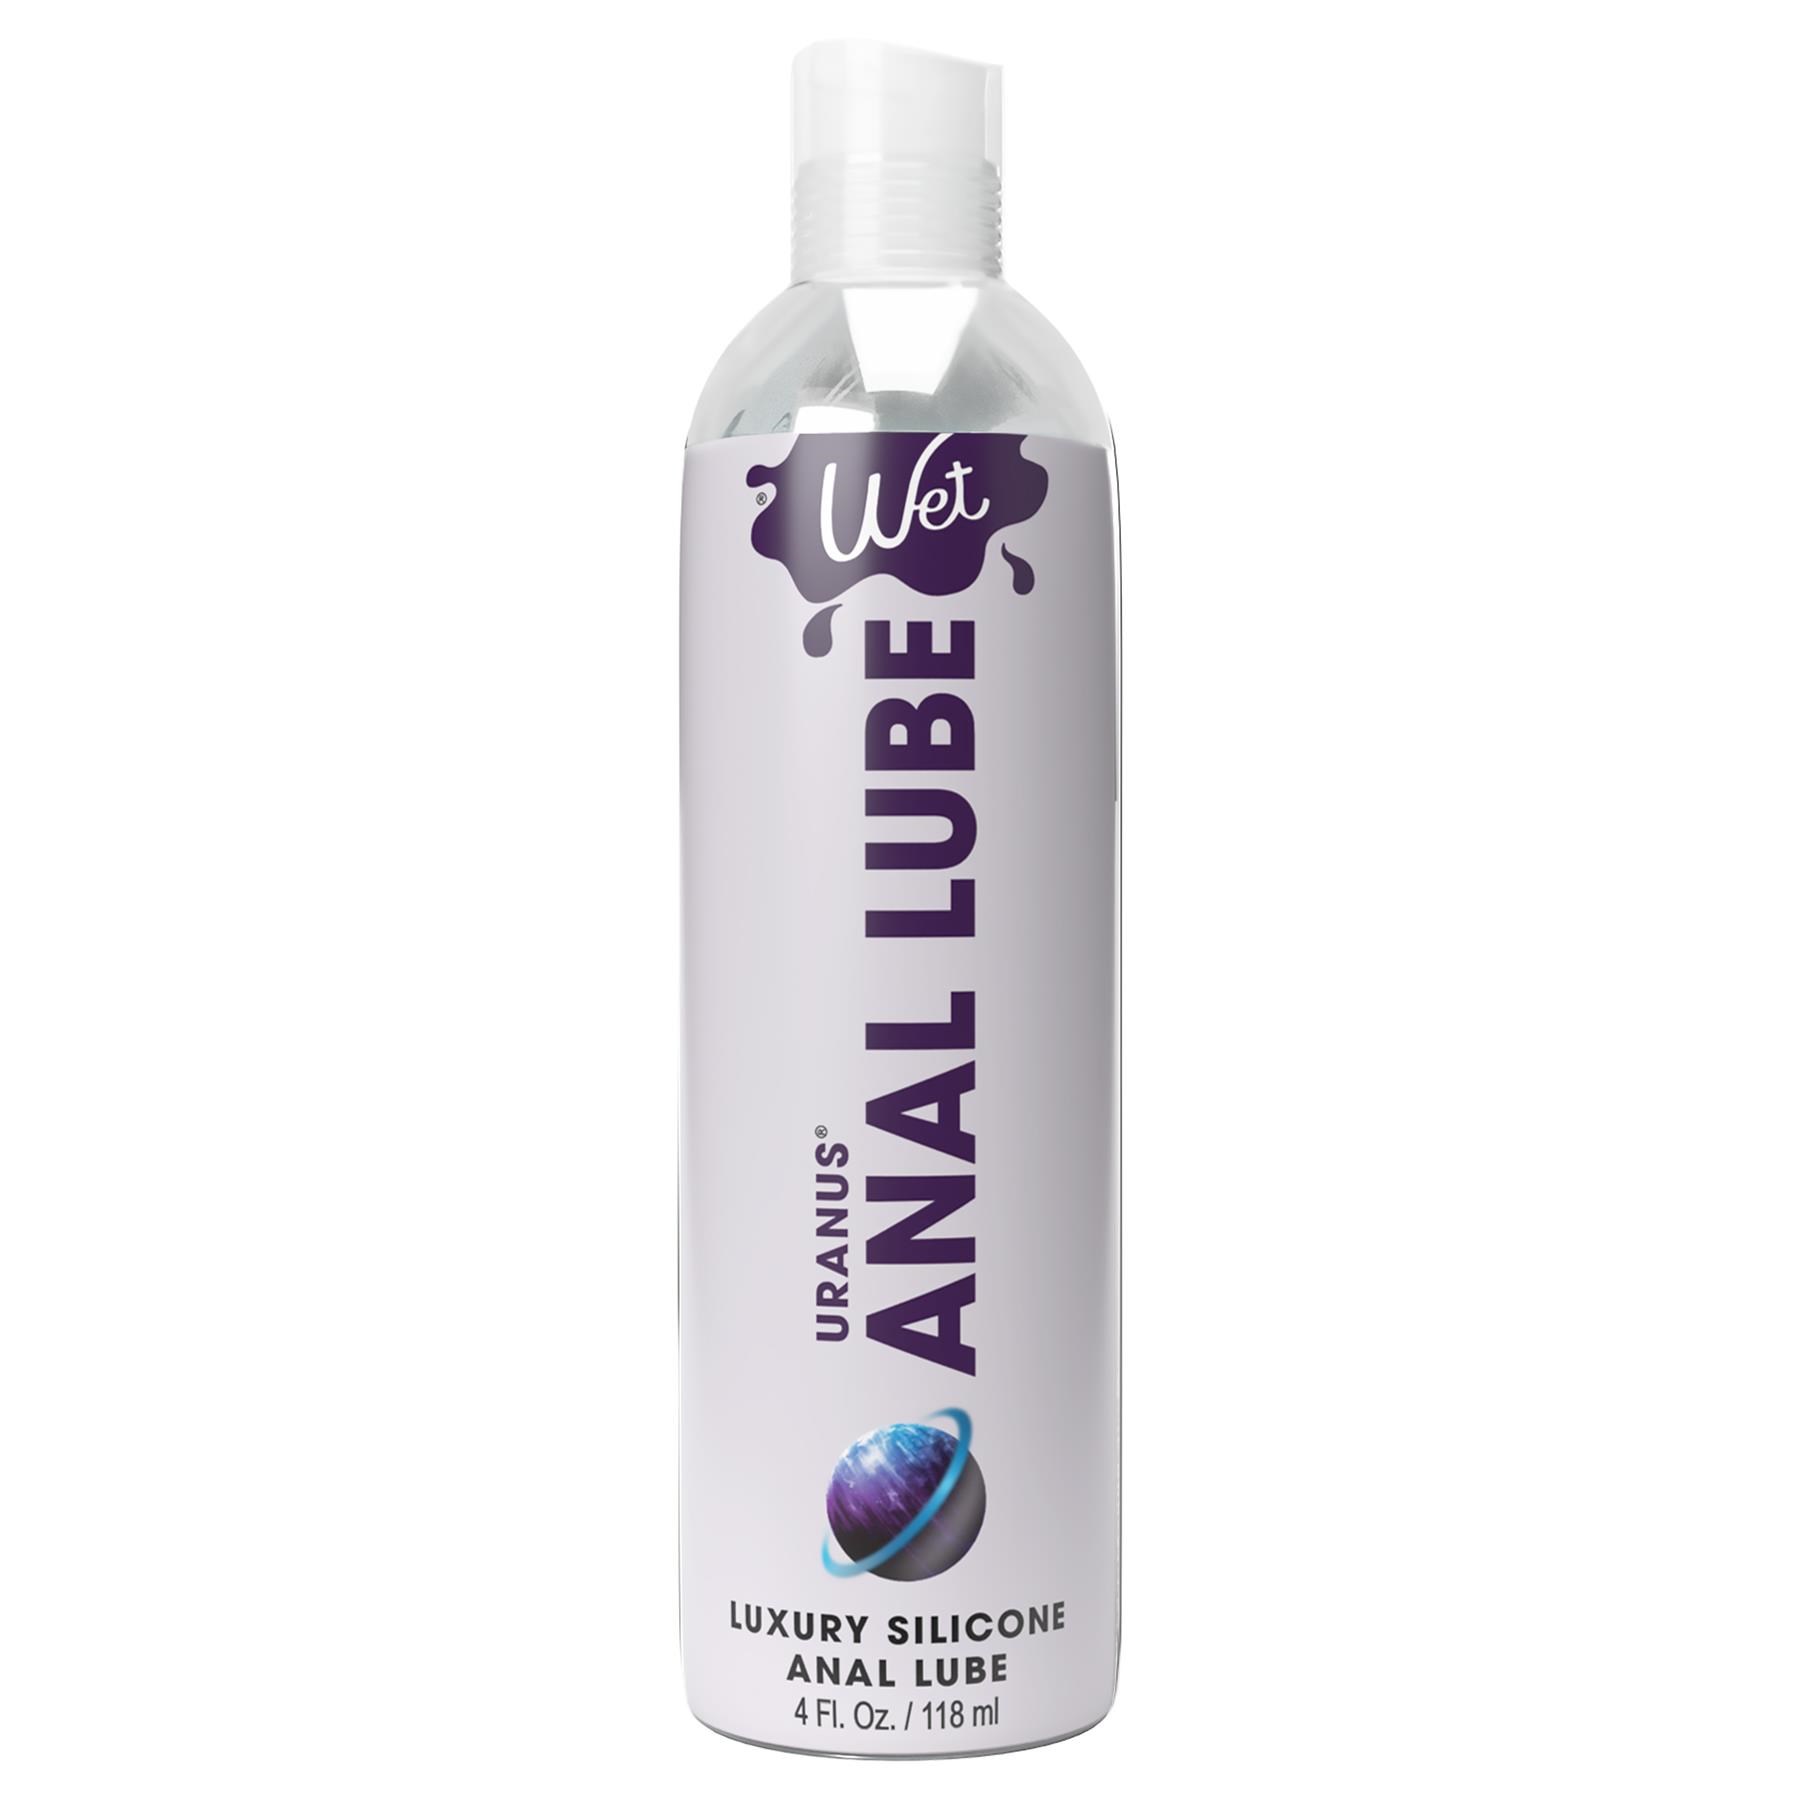 Wet Uranus by Trigg Silicone Anal Lube front